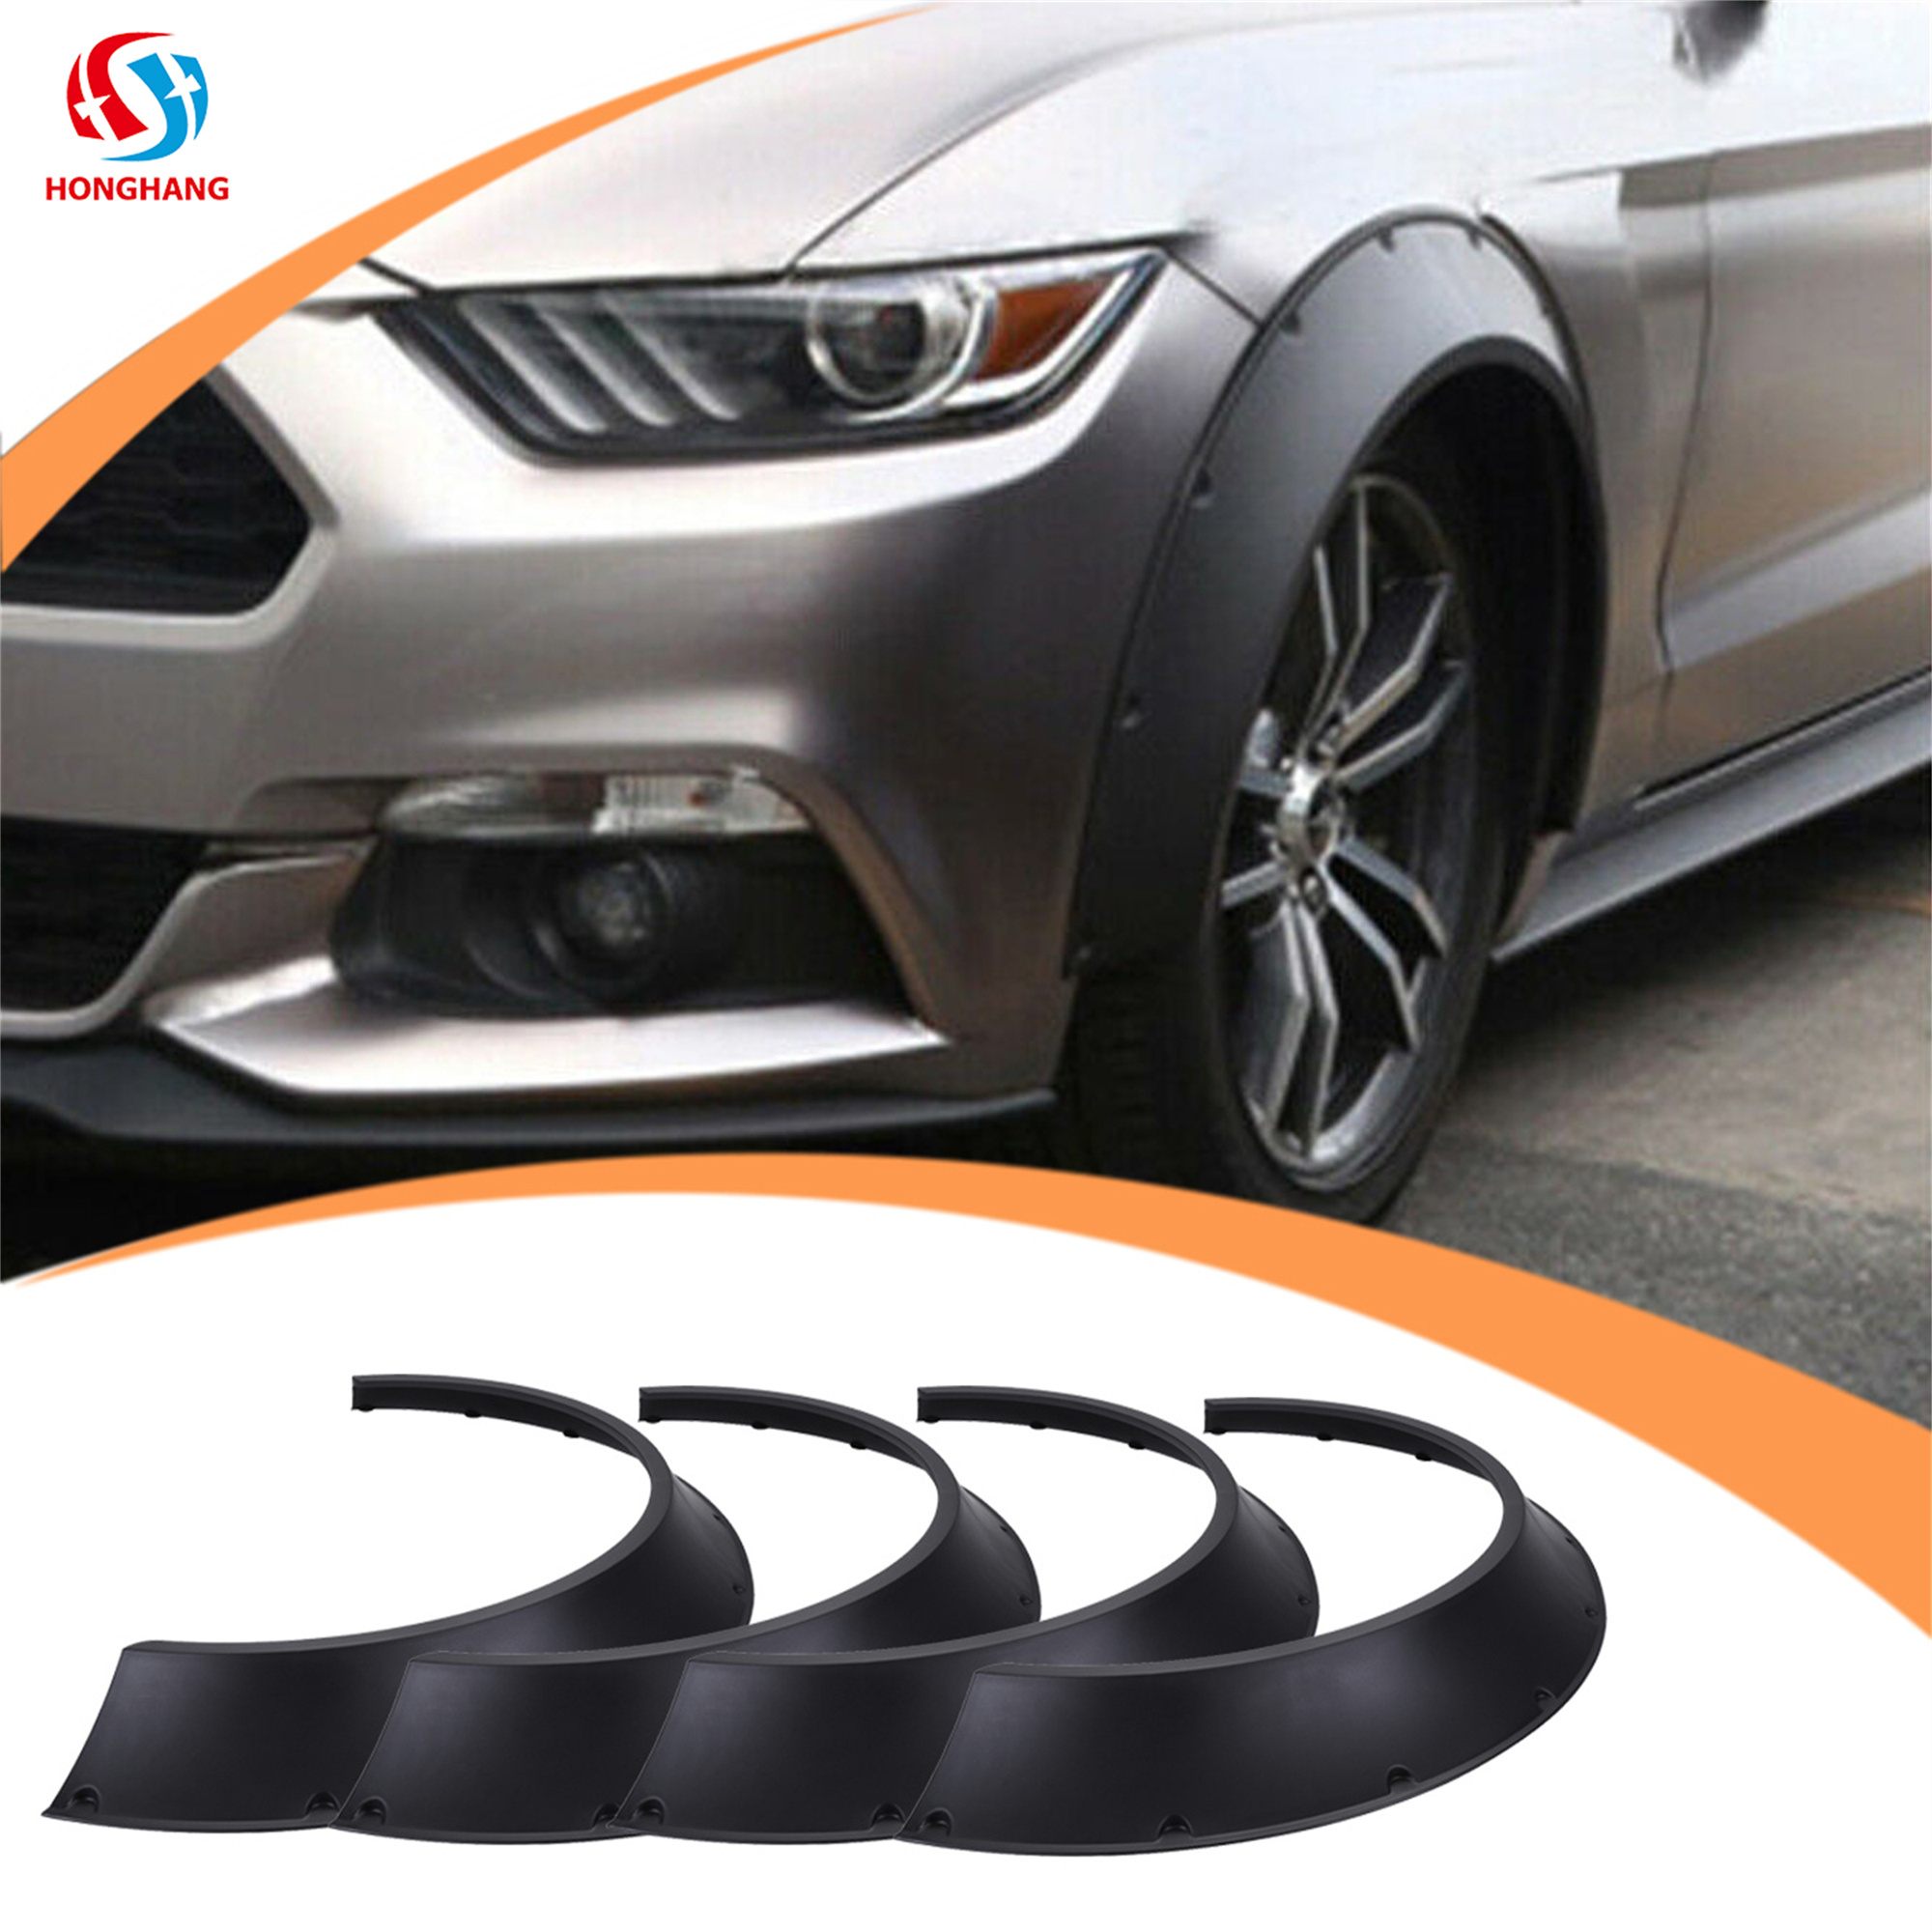 Type B 4pcs/set Big Size Universal Fender Flares For All SUV Cars 